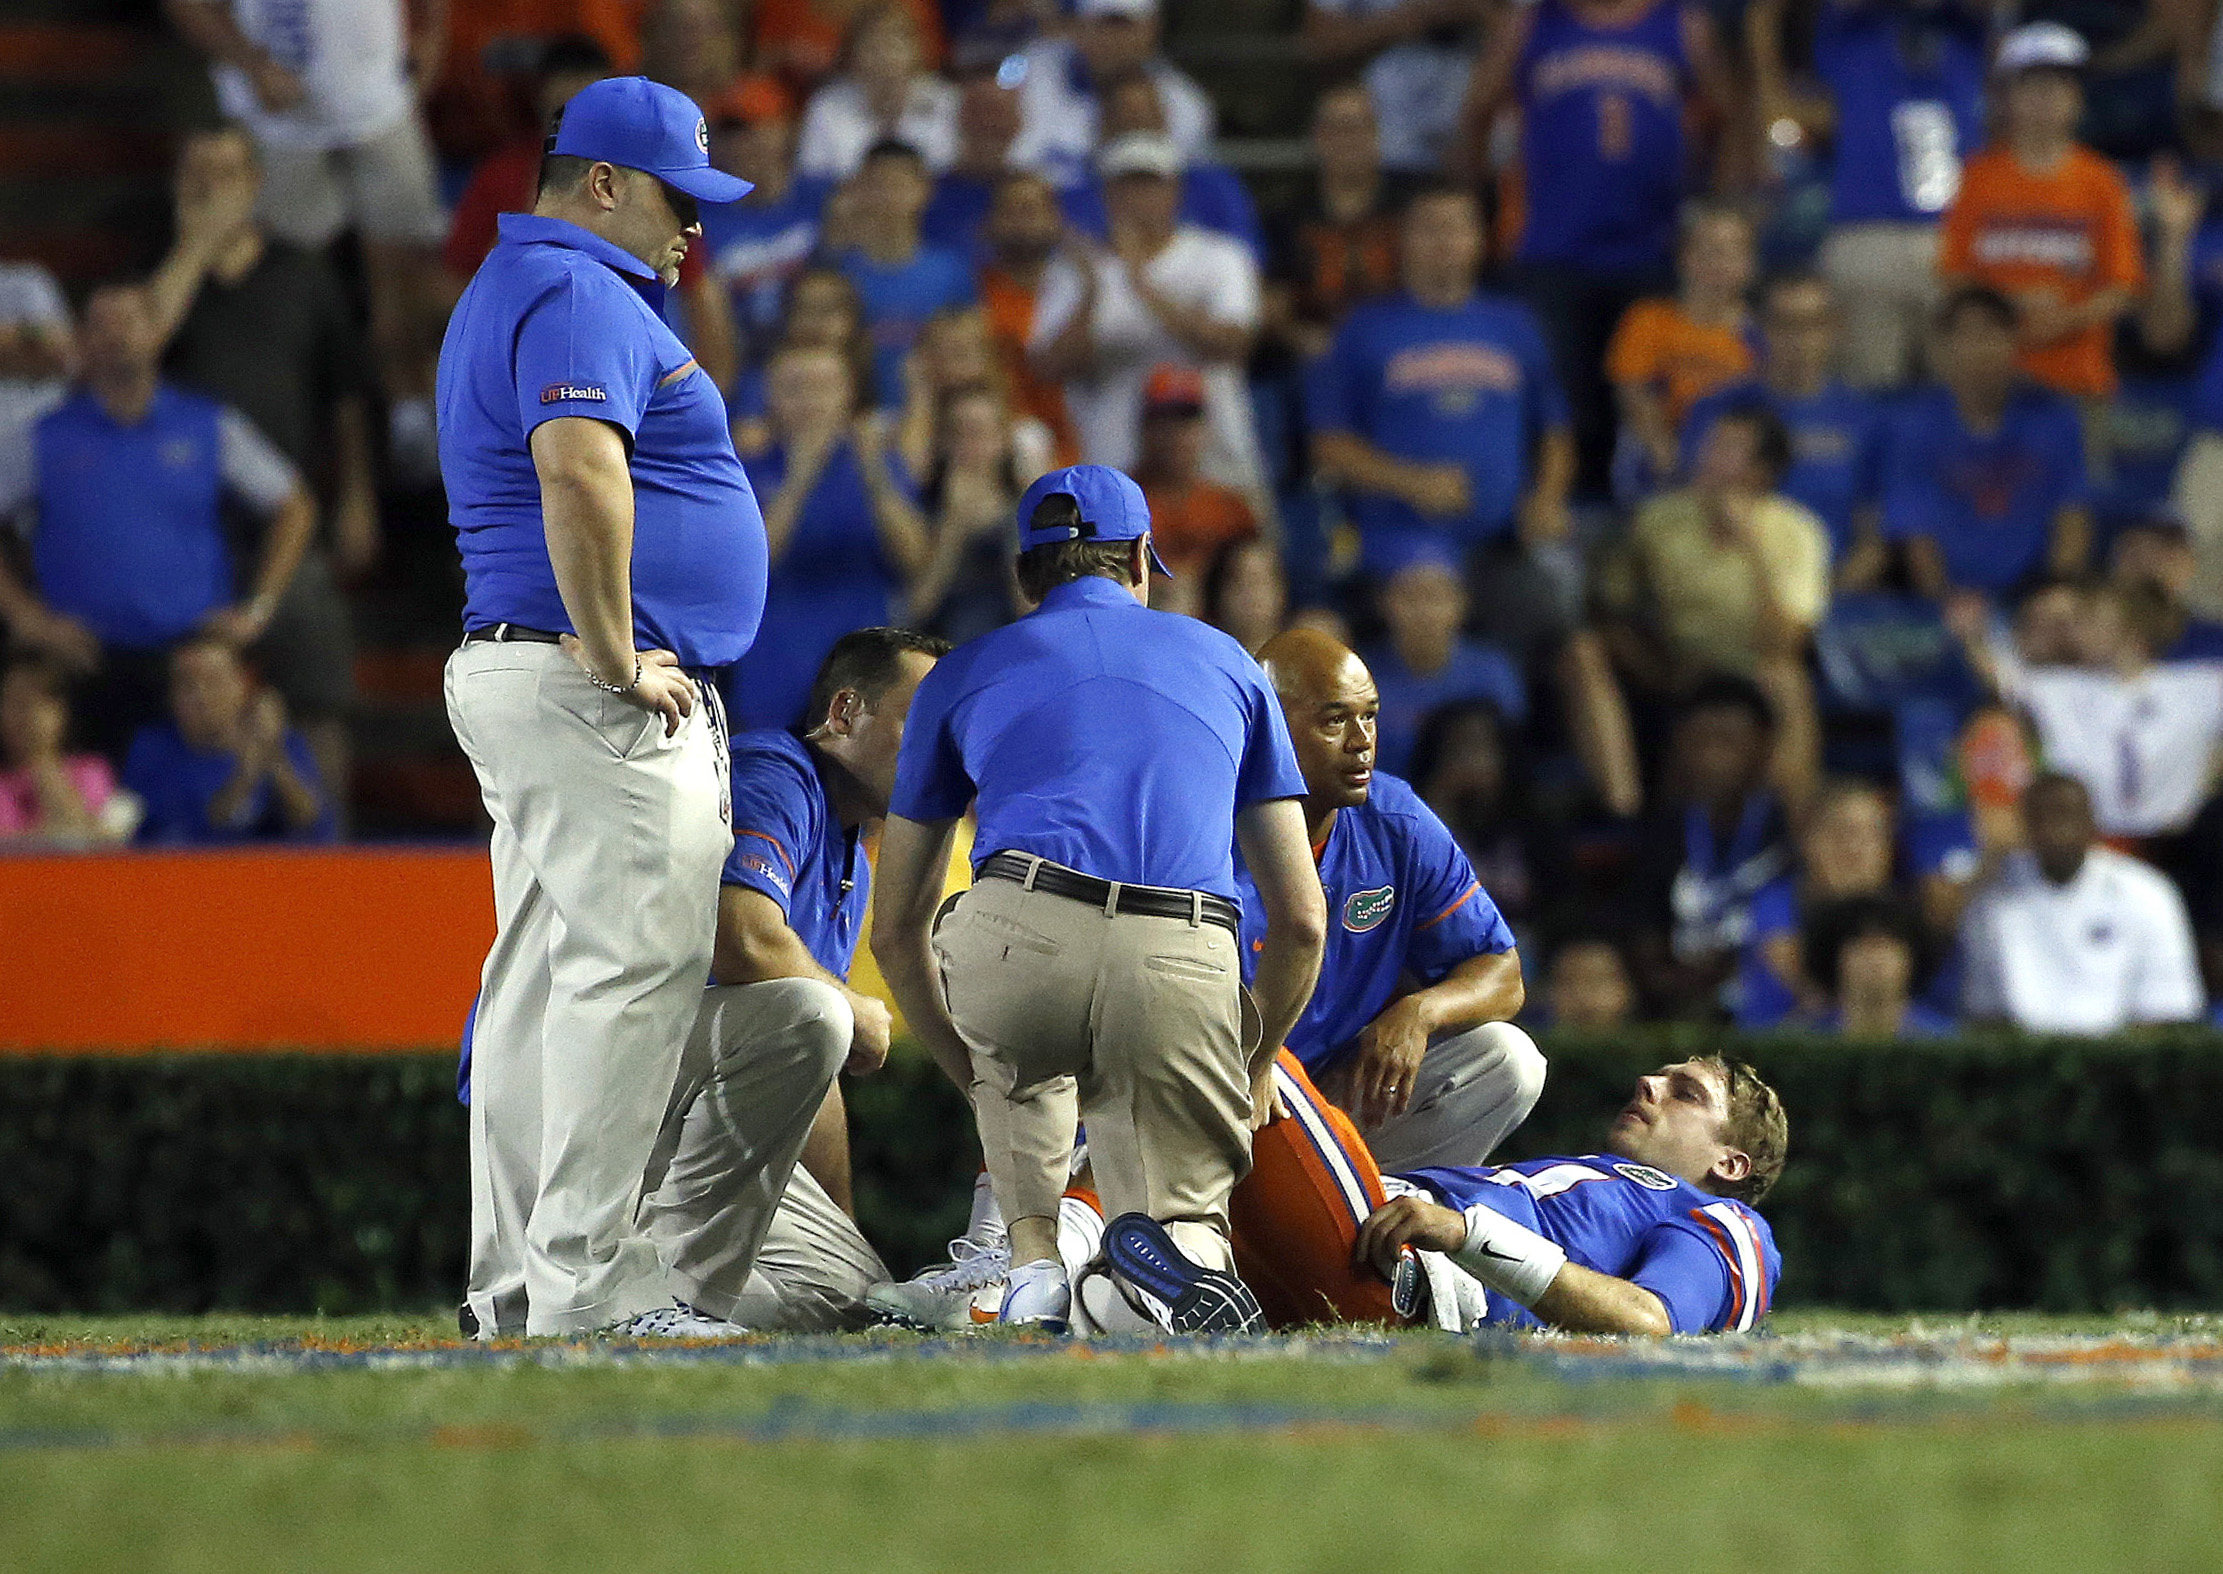 Sep 17, 2016; Gainesville, FL, USA; Florida Gators quarterback Luke Del Rio (14) gets checked out by trainers on the field and then leaves the game against the North Texas Mean Green during the second half at Ben Hill Griffin Stadium. Florida Gators defeated the North Texas Mean Green 32-0. Mandatory Credit: Kim Klement-USA TODAY Sports